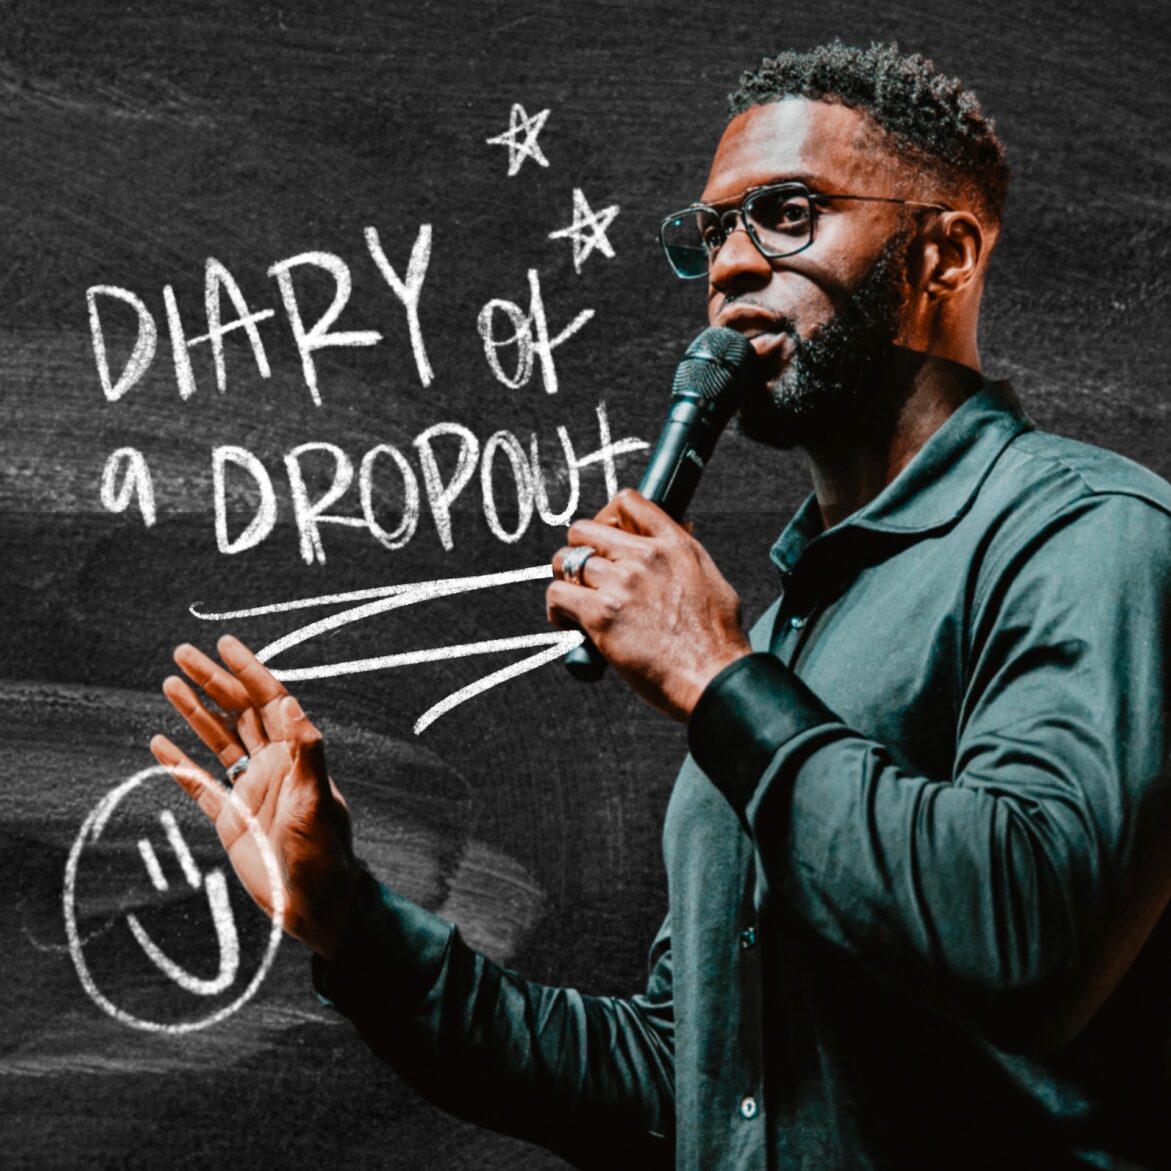 Black Podcasting - Robert Madu | Diary of a Dropout | ’Back to the Basics’ Series | Social Dallas